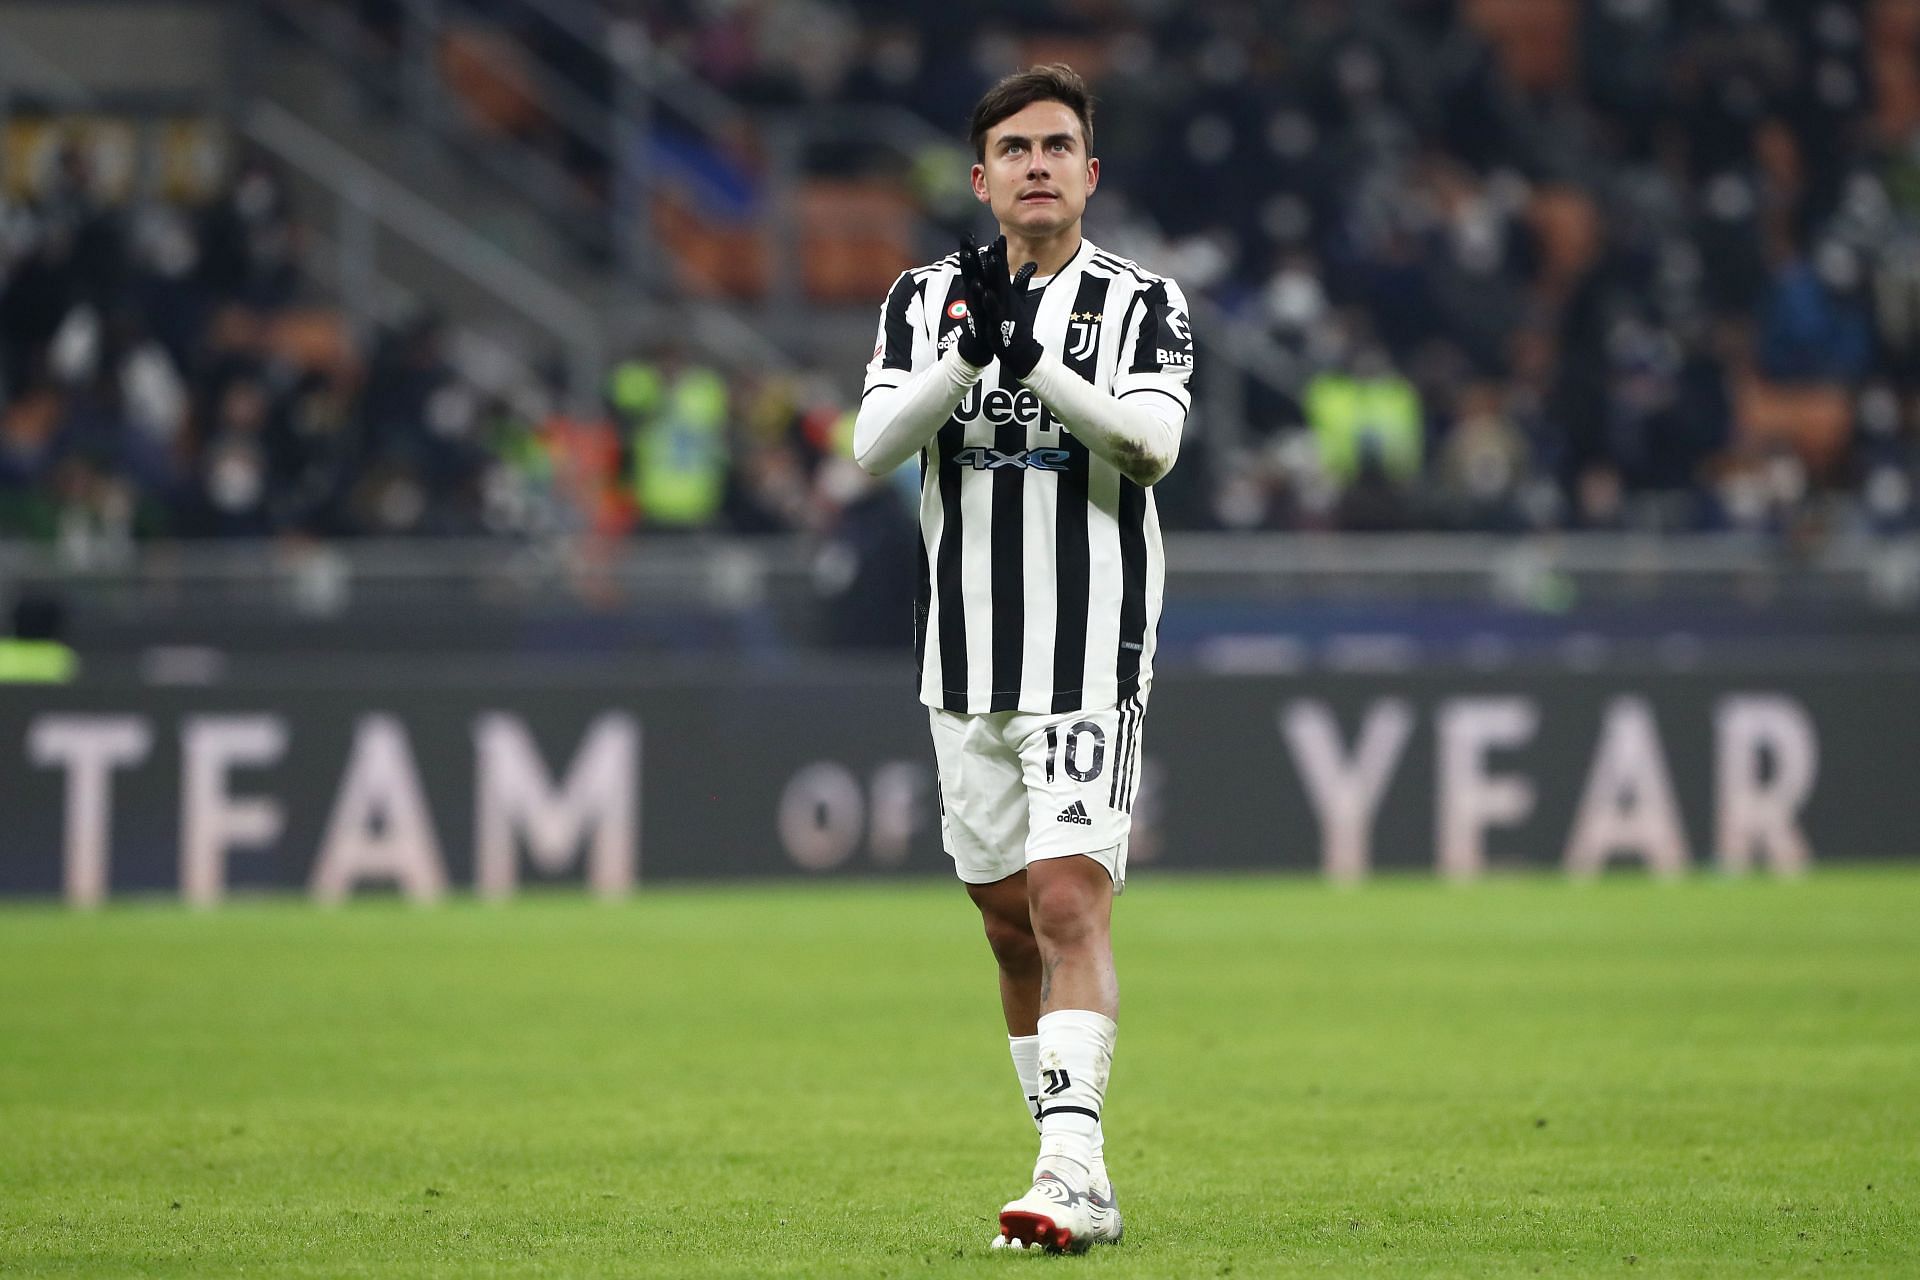 The Argentine is set to leave Turin this summer.